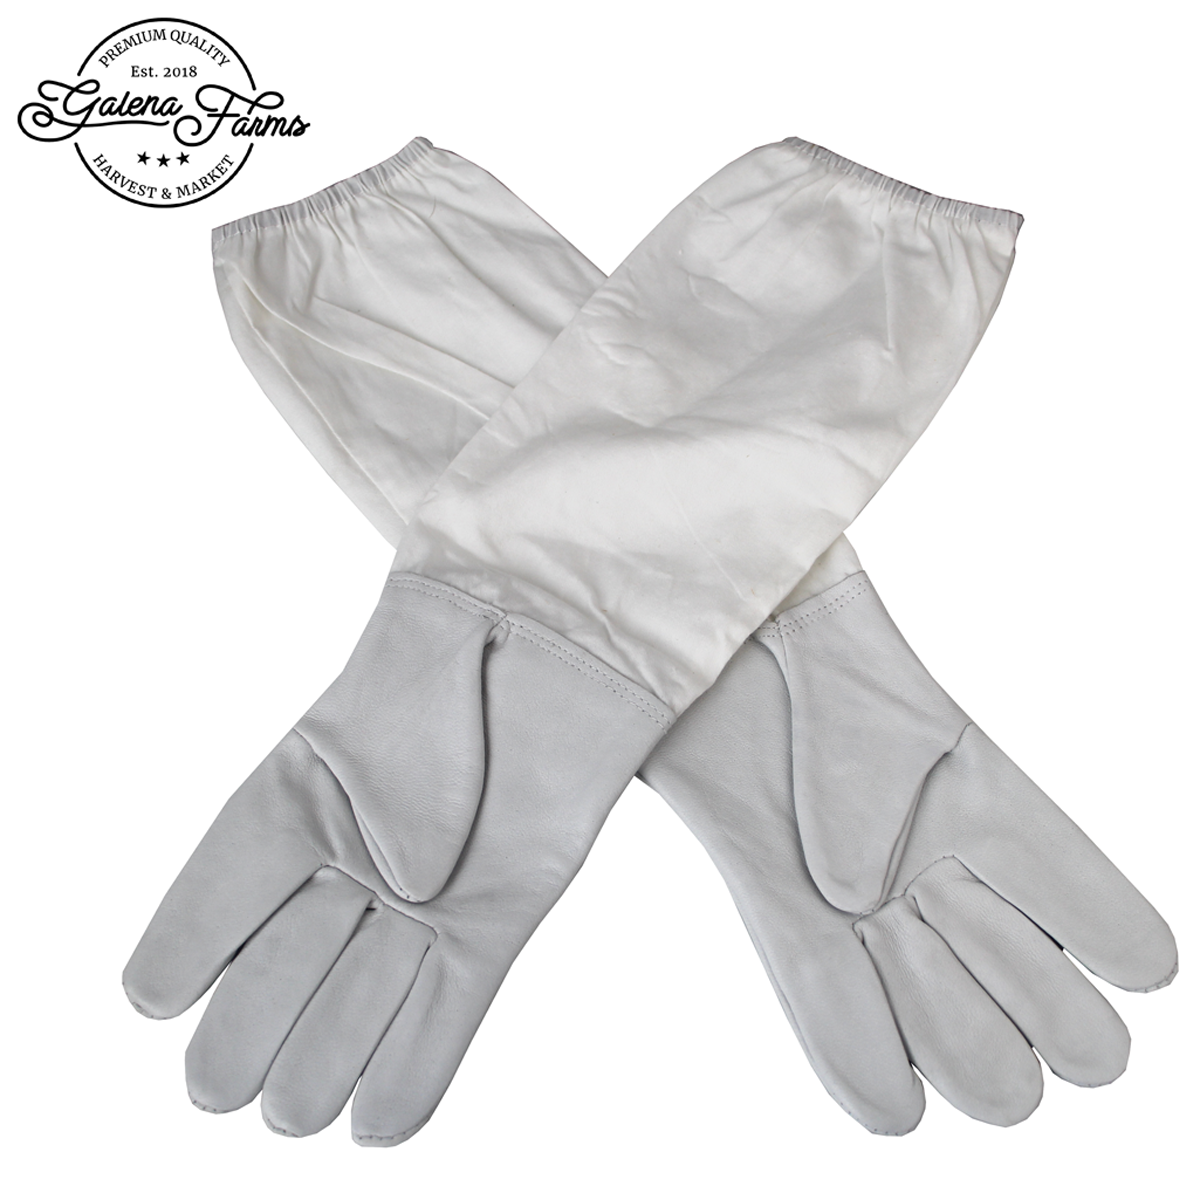 Galena Farms Gloves Are Made From Sheepskin Leather &  Go Down To The Elbow. They Are Cinched On The End To Keep Bees Out